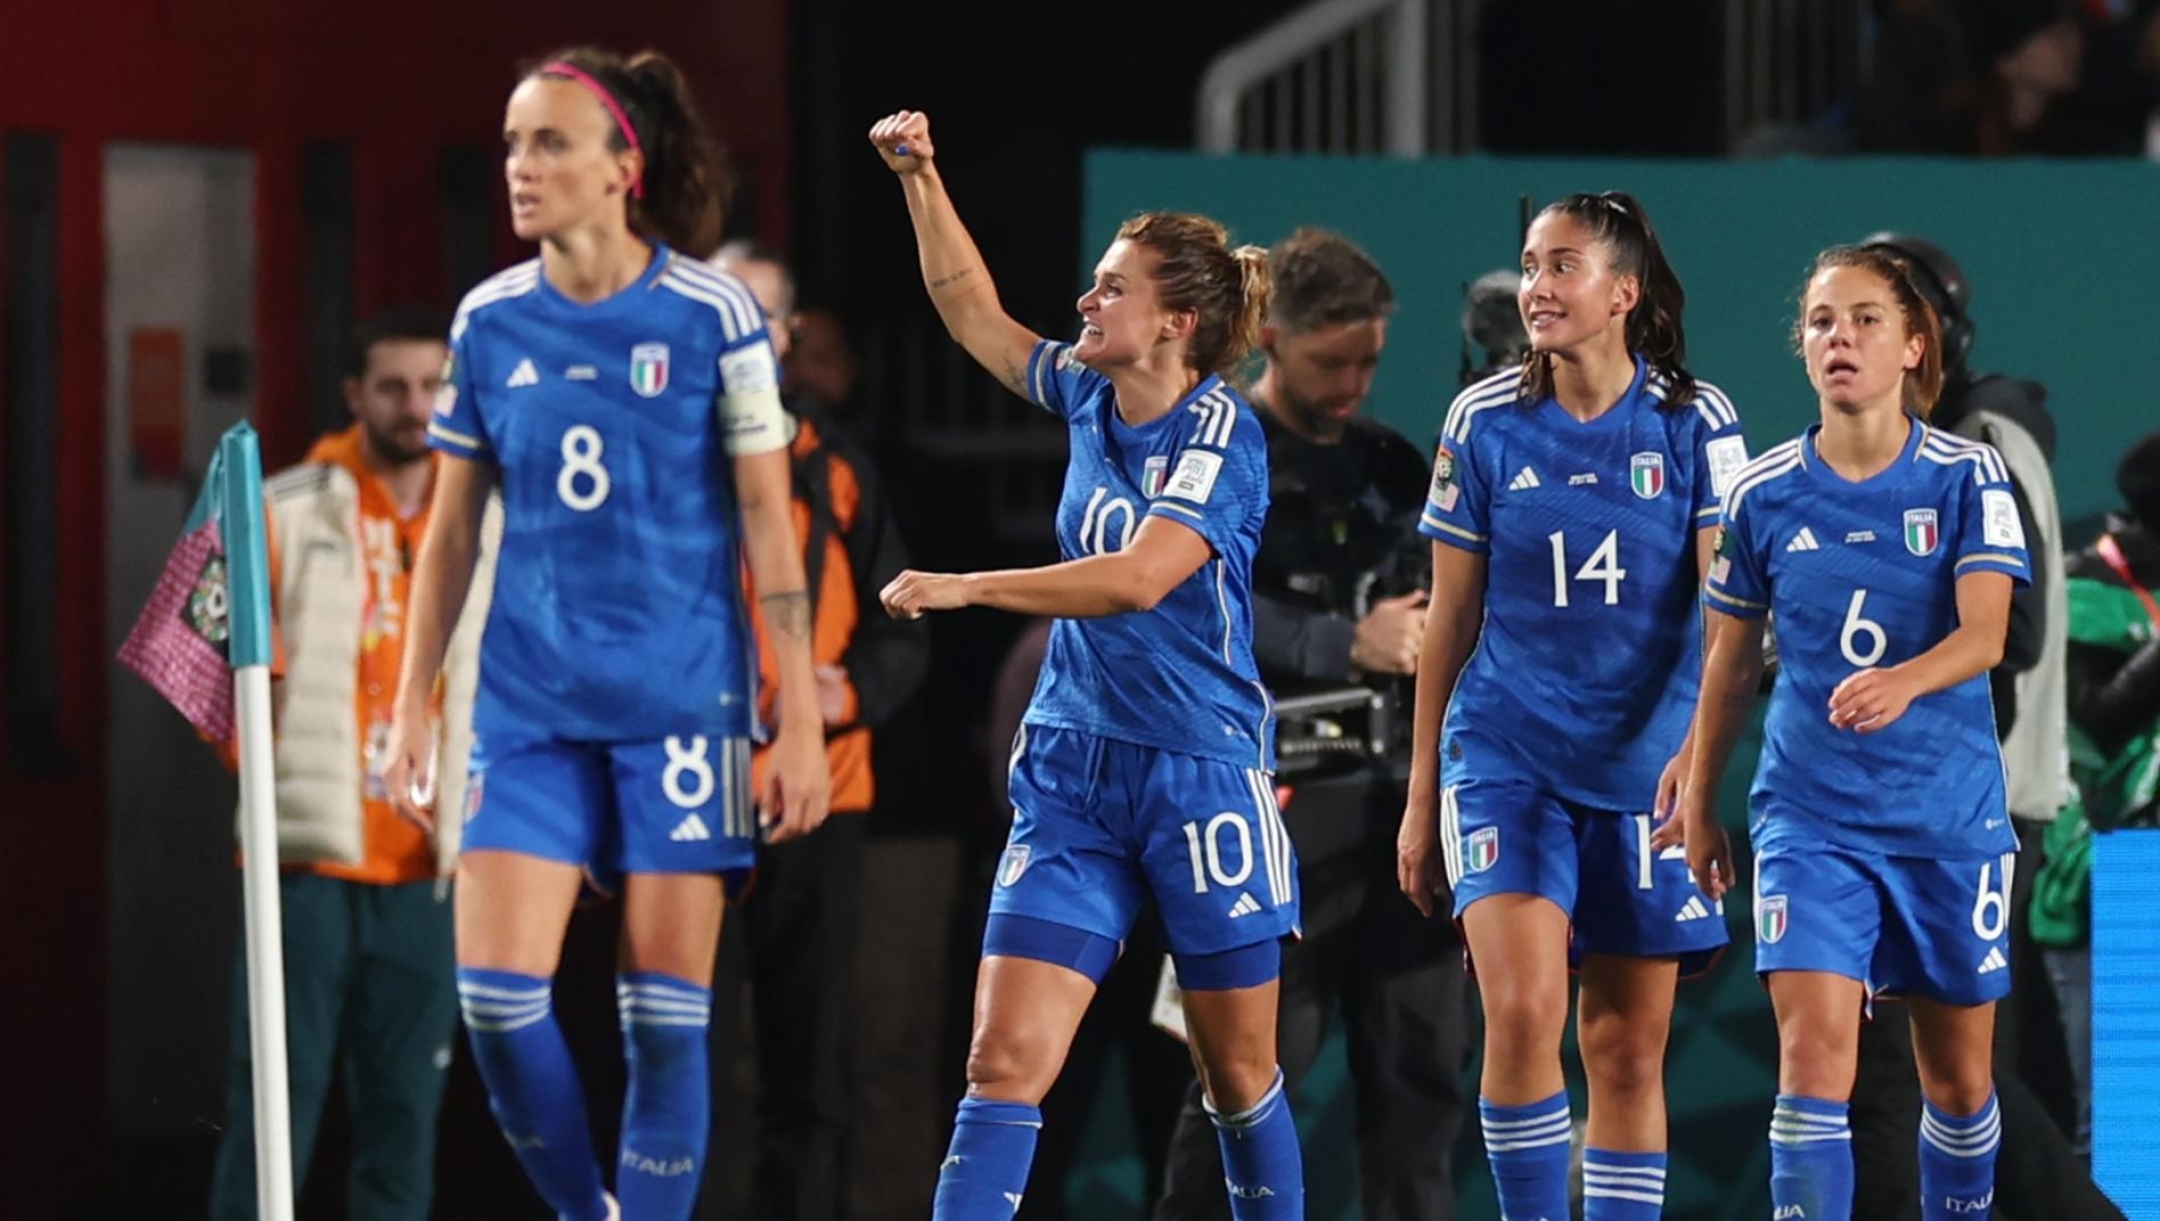 AUCKLAND, NEW ZEALAND - JULY 24: Cristiana Girelli (3rd R) of Italy celebrates with teammates after scoring her team's first goal during the FIFA Women's World Cup Australia & New Zealand 2023 Group G match between Italy and Argentina at Eden Park on July 24, 2023 in Auckland / T?maki Makaurau, New Zealand. (Photo by Buda Mendes/Getty Images)